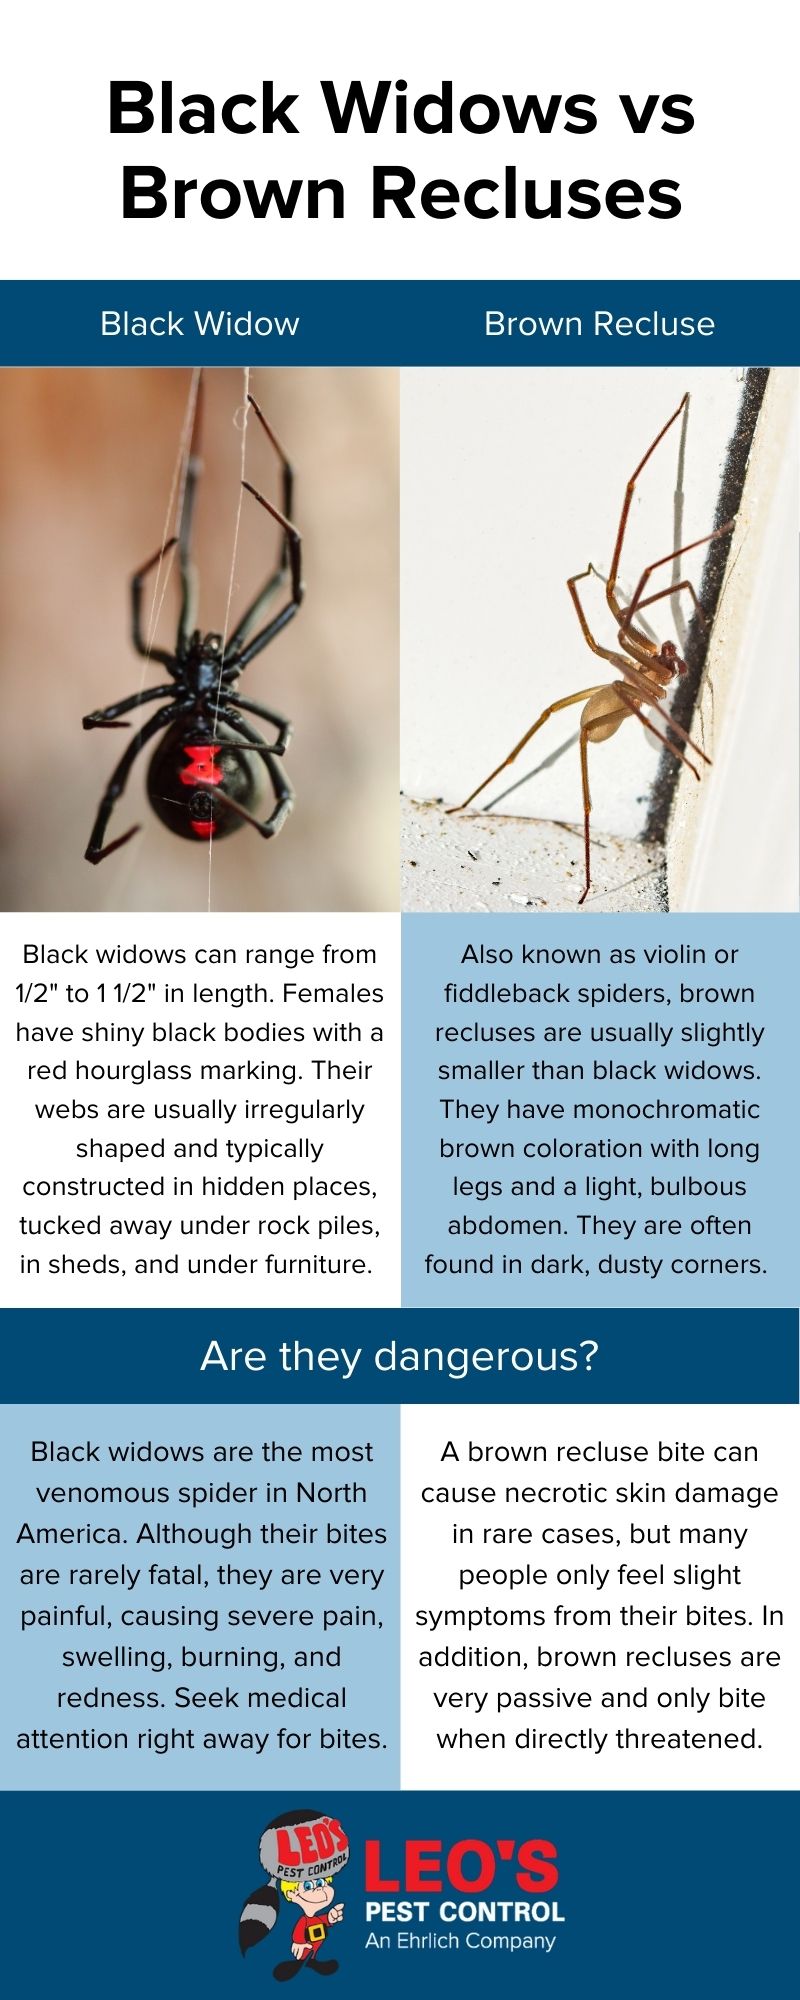 The difference between black widows and brown recluses in Bristol TN - Leo's Pest Control